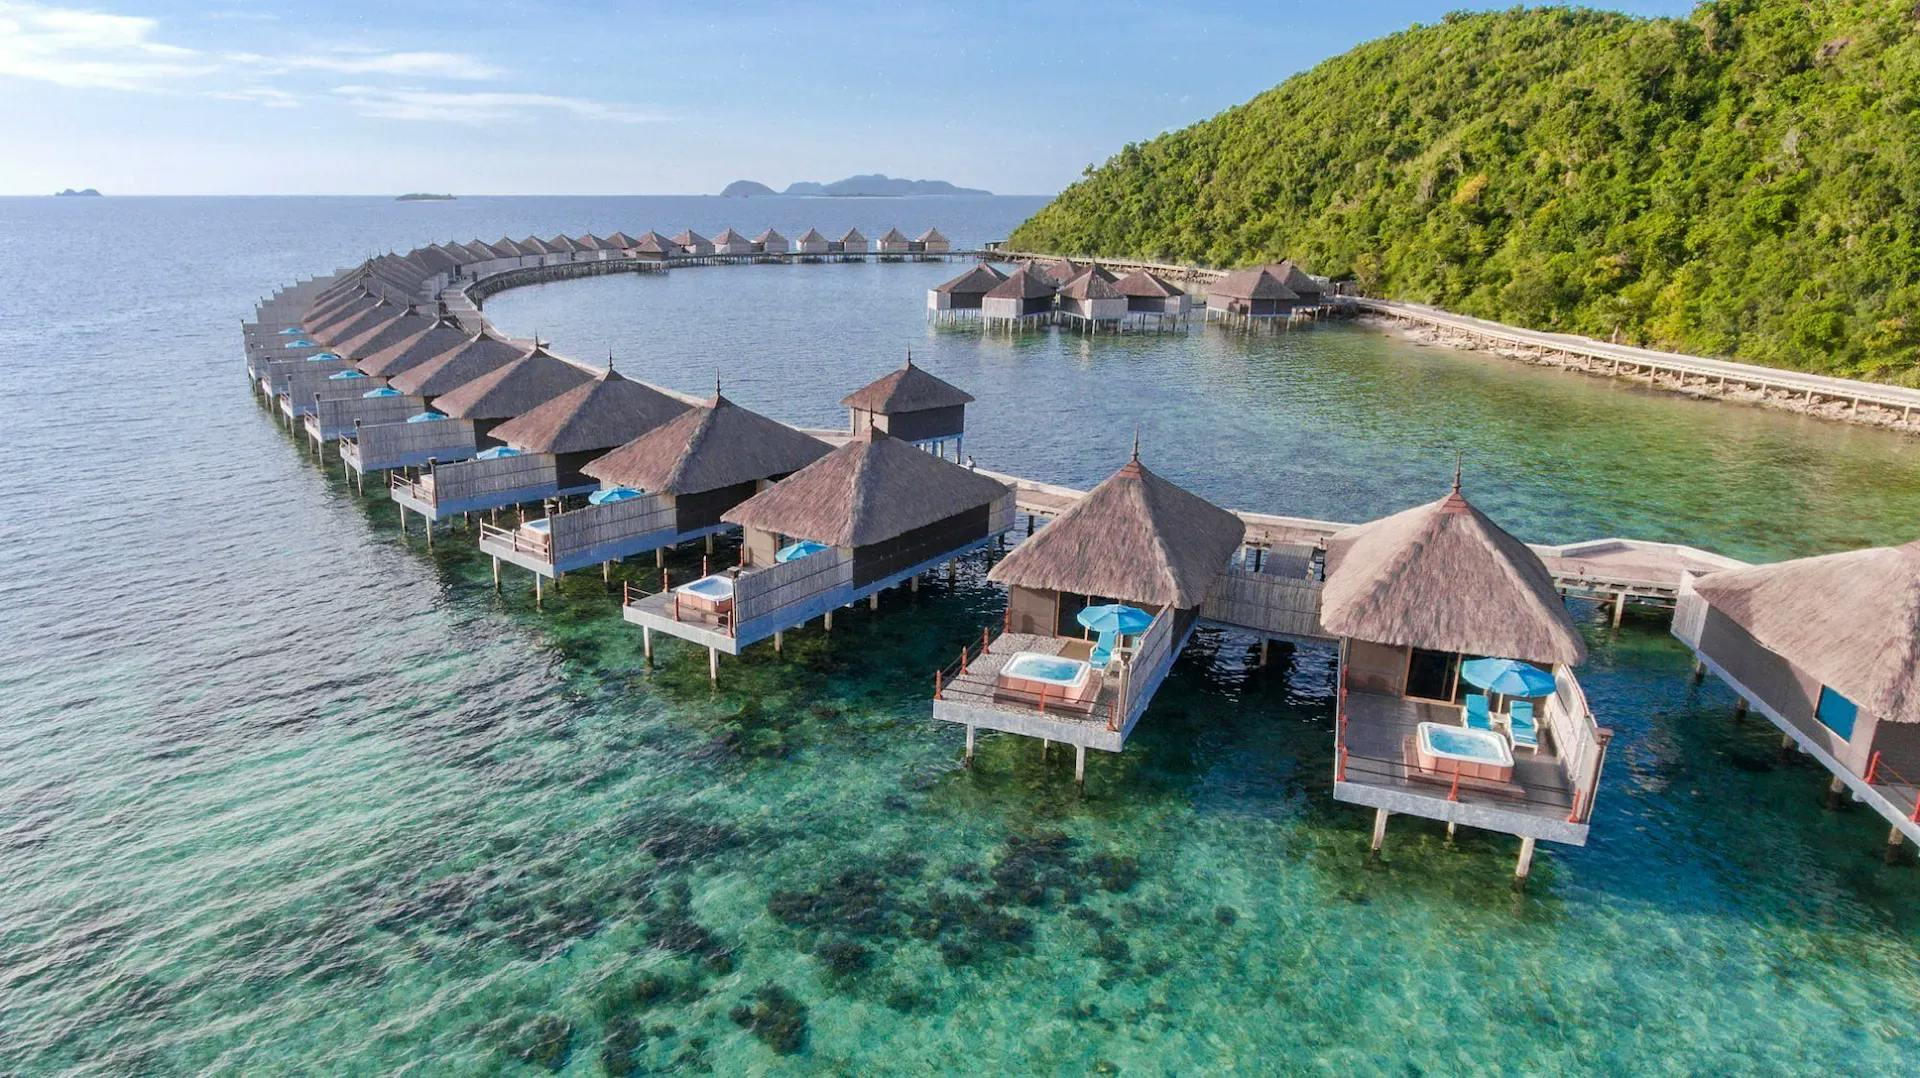 Overwater bungalows of Huma Island Resort and Spa, Philippines